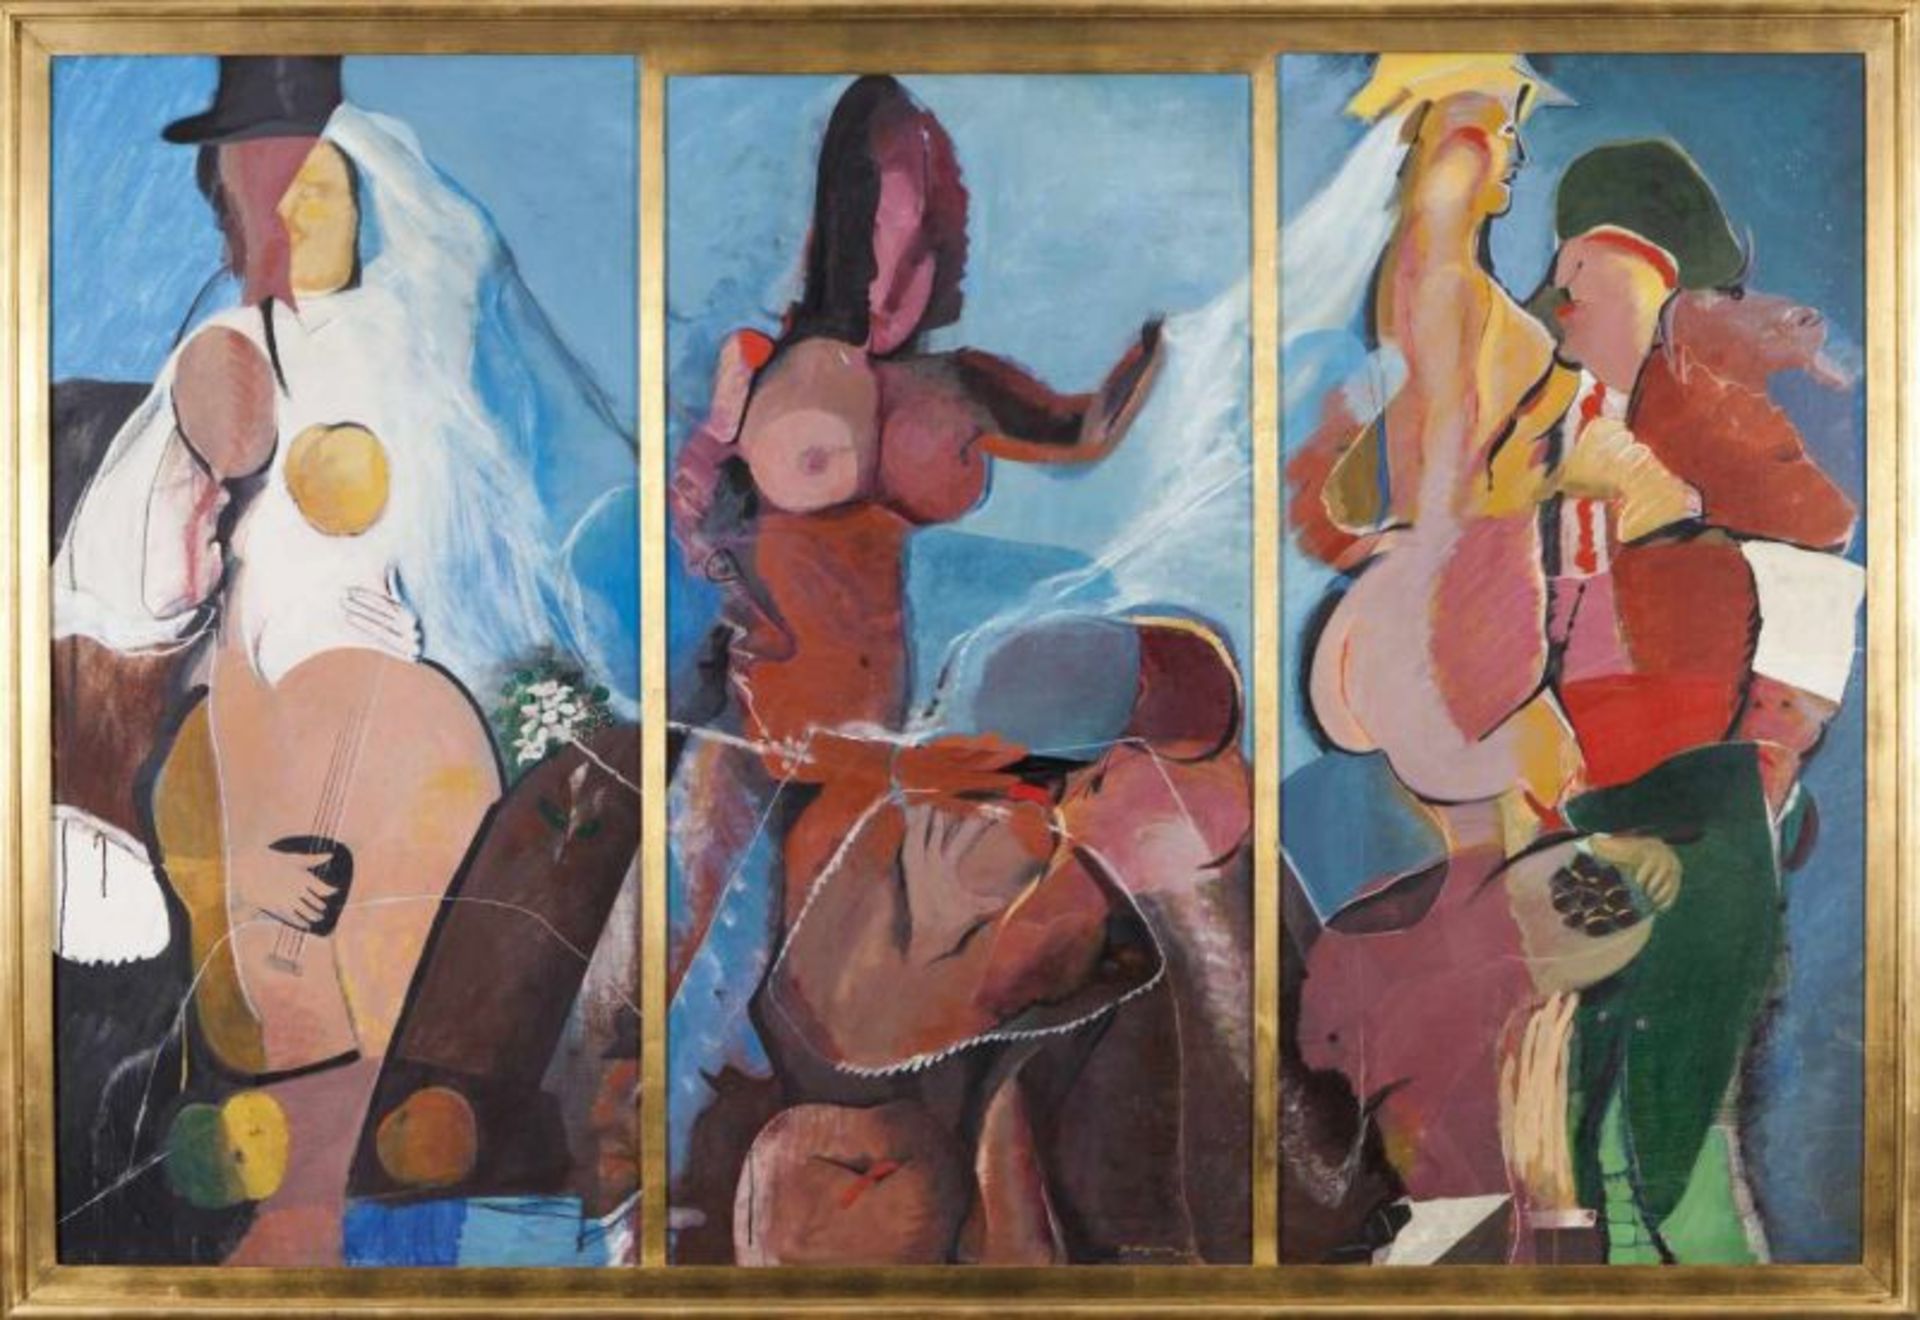 Sá Nogueira (1921-2002)"Os Bons e os Maus Frutos"TriptychOil on canvasSigned and dated 84-87Each